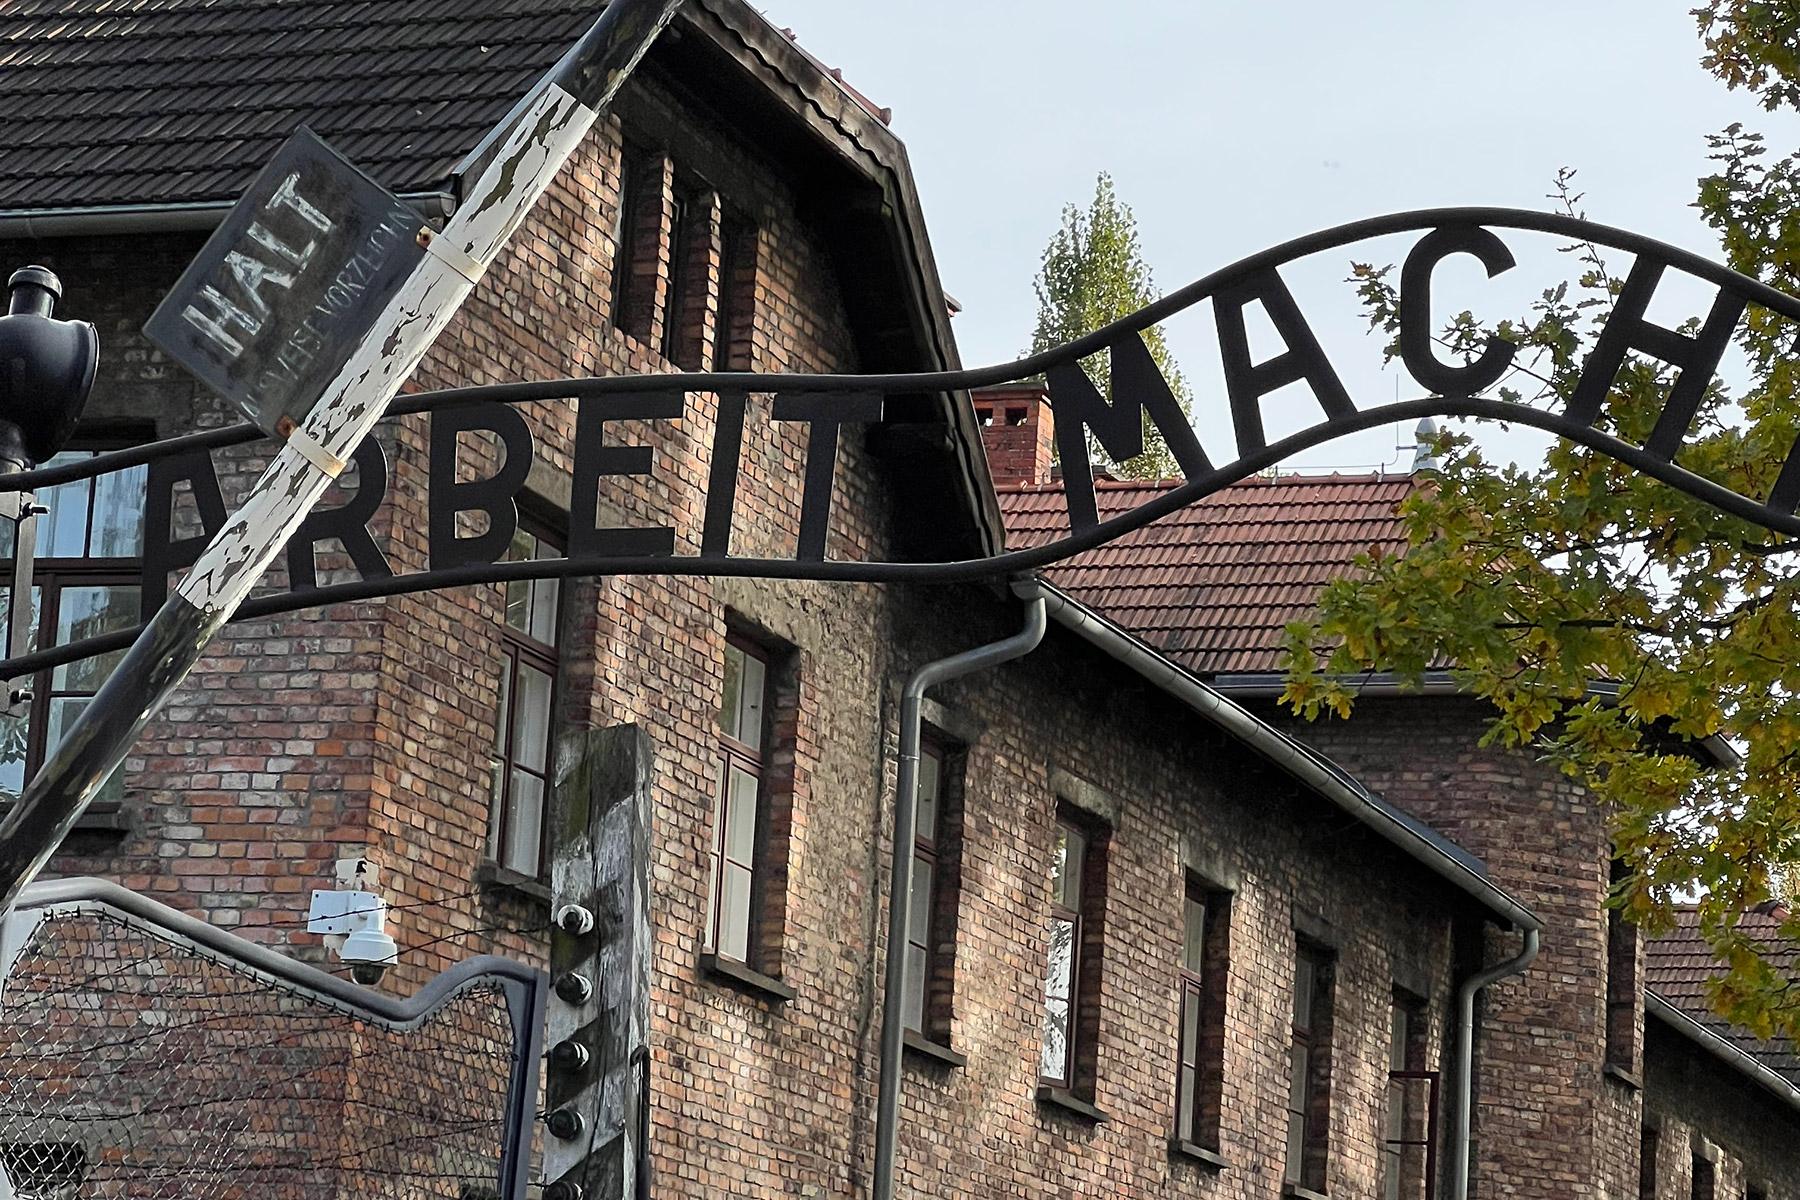 The entrance to the Auschwitz-Birkenau former concentration camp. Photo: LWF/A. Danielsson